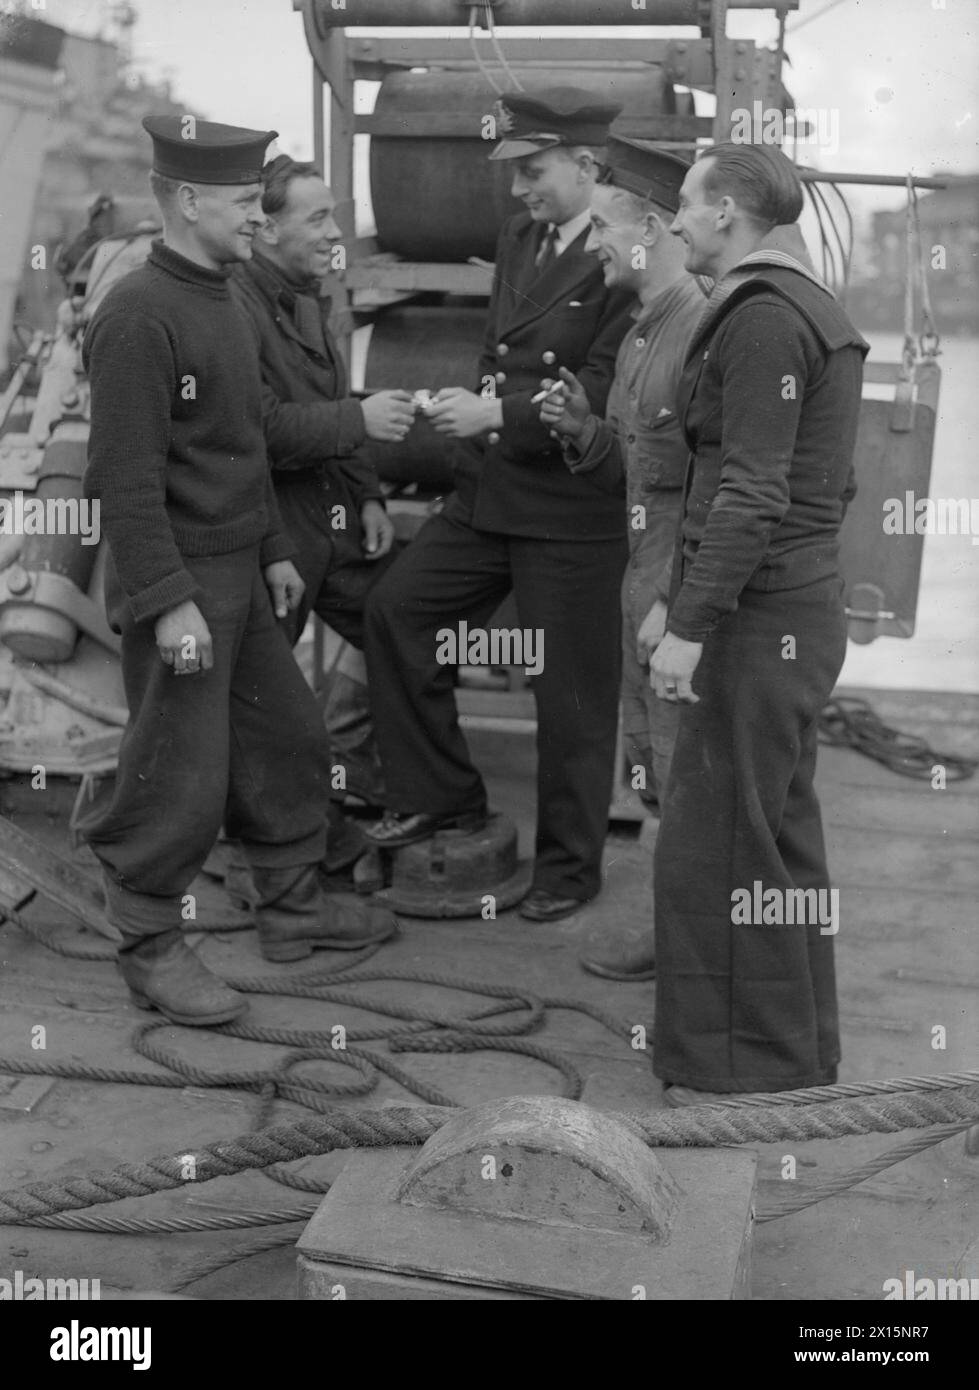 THE FRIGATE HMS SPEY DESTROYS TWO U-BOATS. 2 MARCH 1944, LIVERPOOL. HMS SPEY HUNTED AND SANK TWO U-BOATS IN THE NORTH ATLANTIC RECENTLY, PRISONERS WERE TAKEN FROM BOTH. - Sub Lieutenant Victor Valentine, of Melbourne, Australia, RANVR with members of the depth-charge party. Left to right: Leading Signalman G Brammer, of Southampton; Ordinary Seaman W Howie, of Glasgow; Able Seaman Frank Cheadle, of Leicester, and Able Seaman Thomas I Thompson, of Gateshead Stock Photo